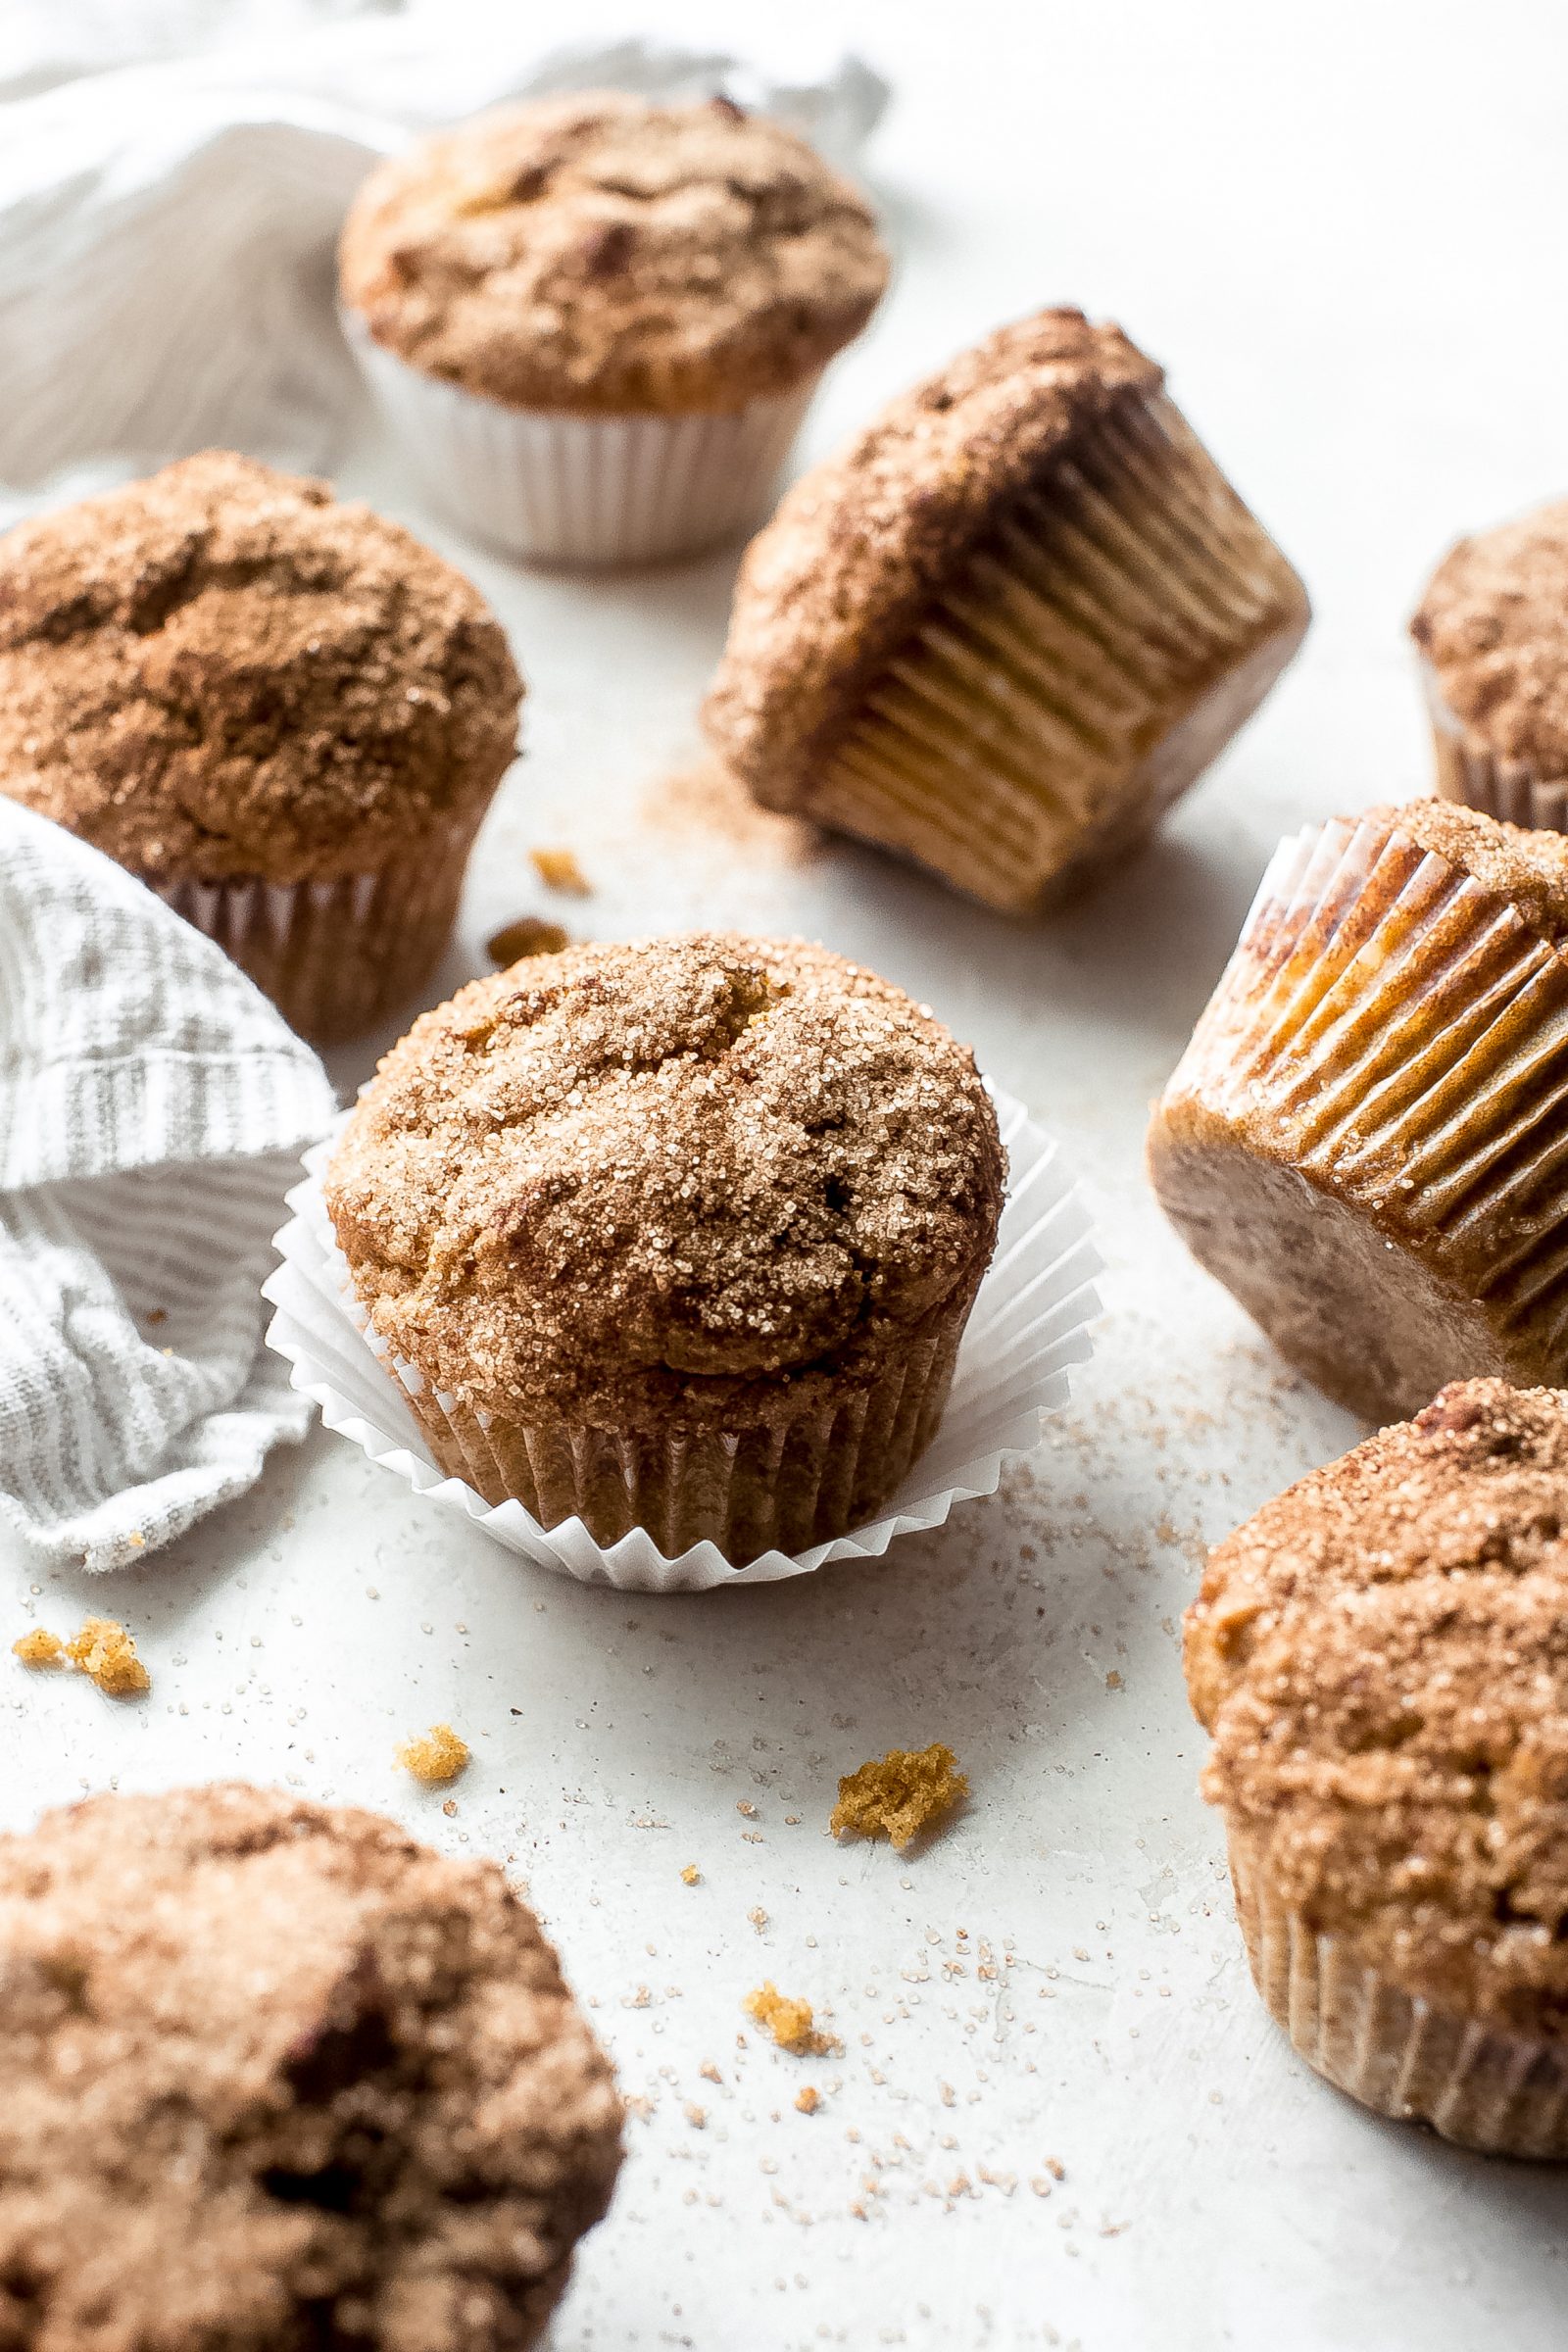 scattered muffin paper-lined pumpkin snickerdoodle muffins on a white surface